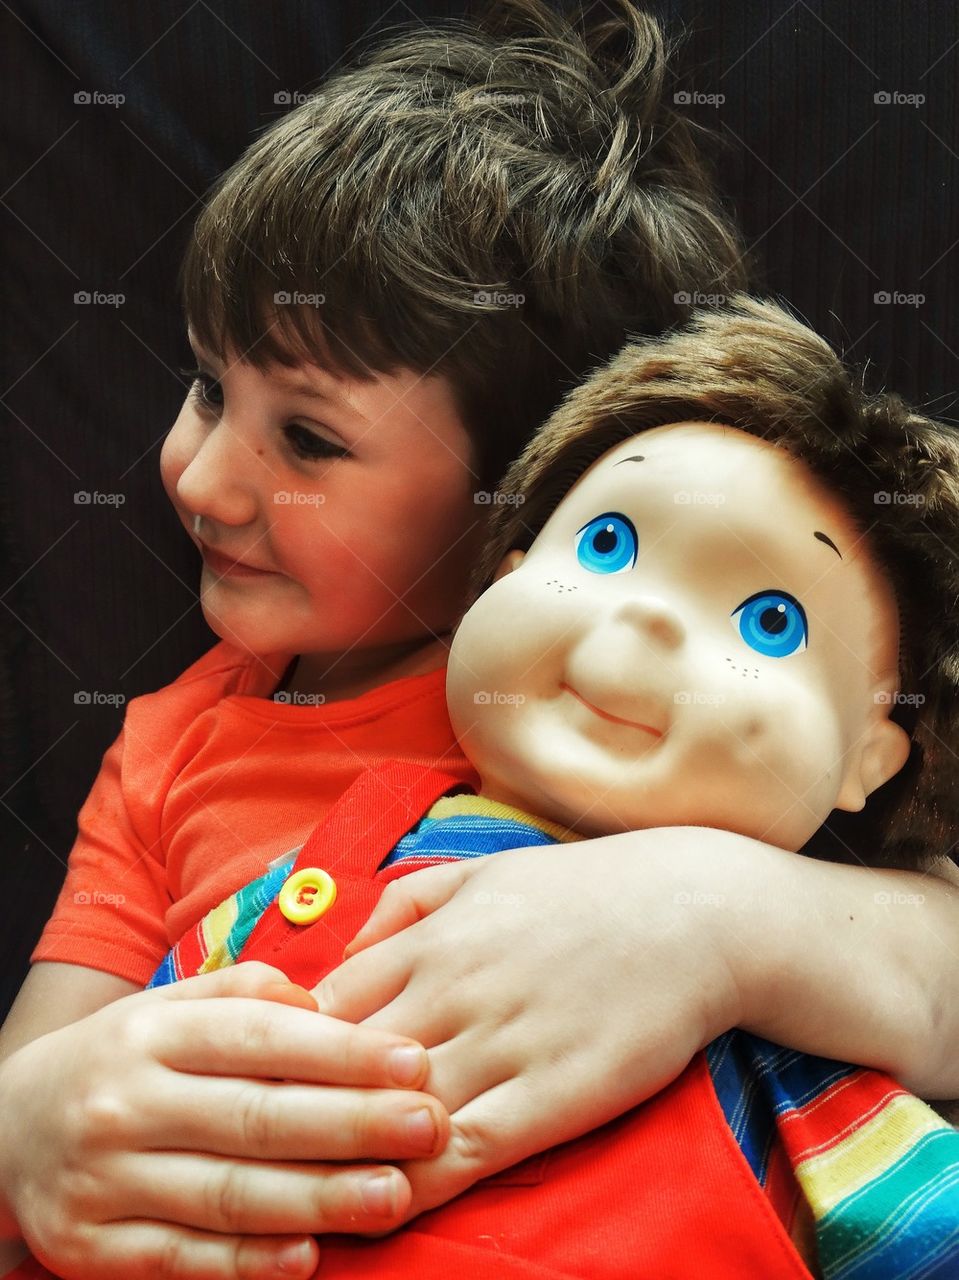 Little Boy And His Doll. Young Boy With A Doll That Looks Like Him
